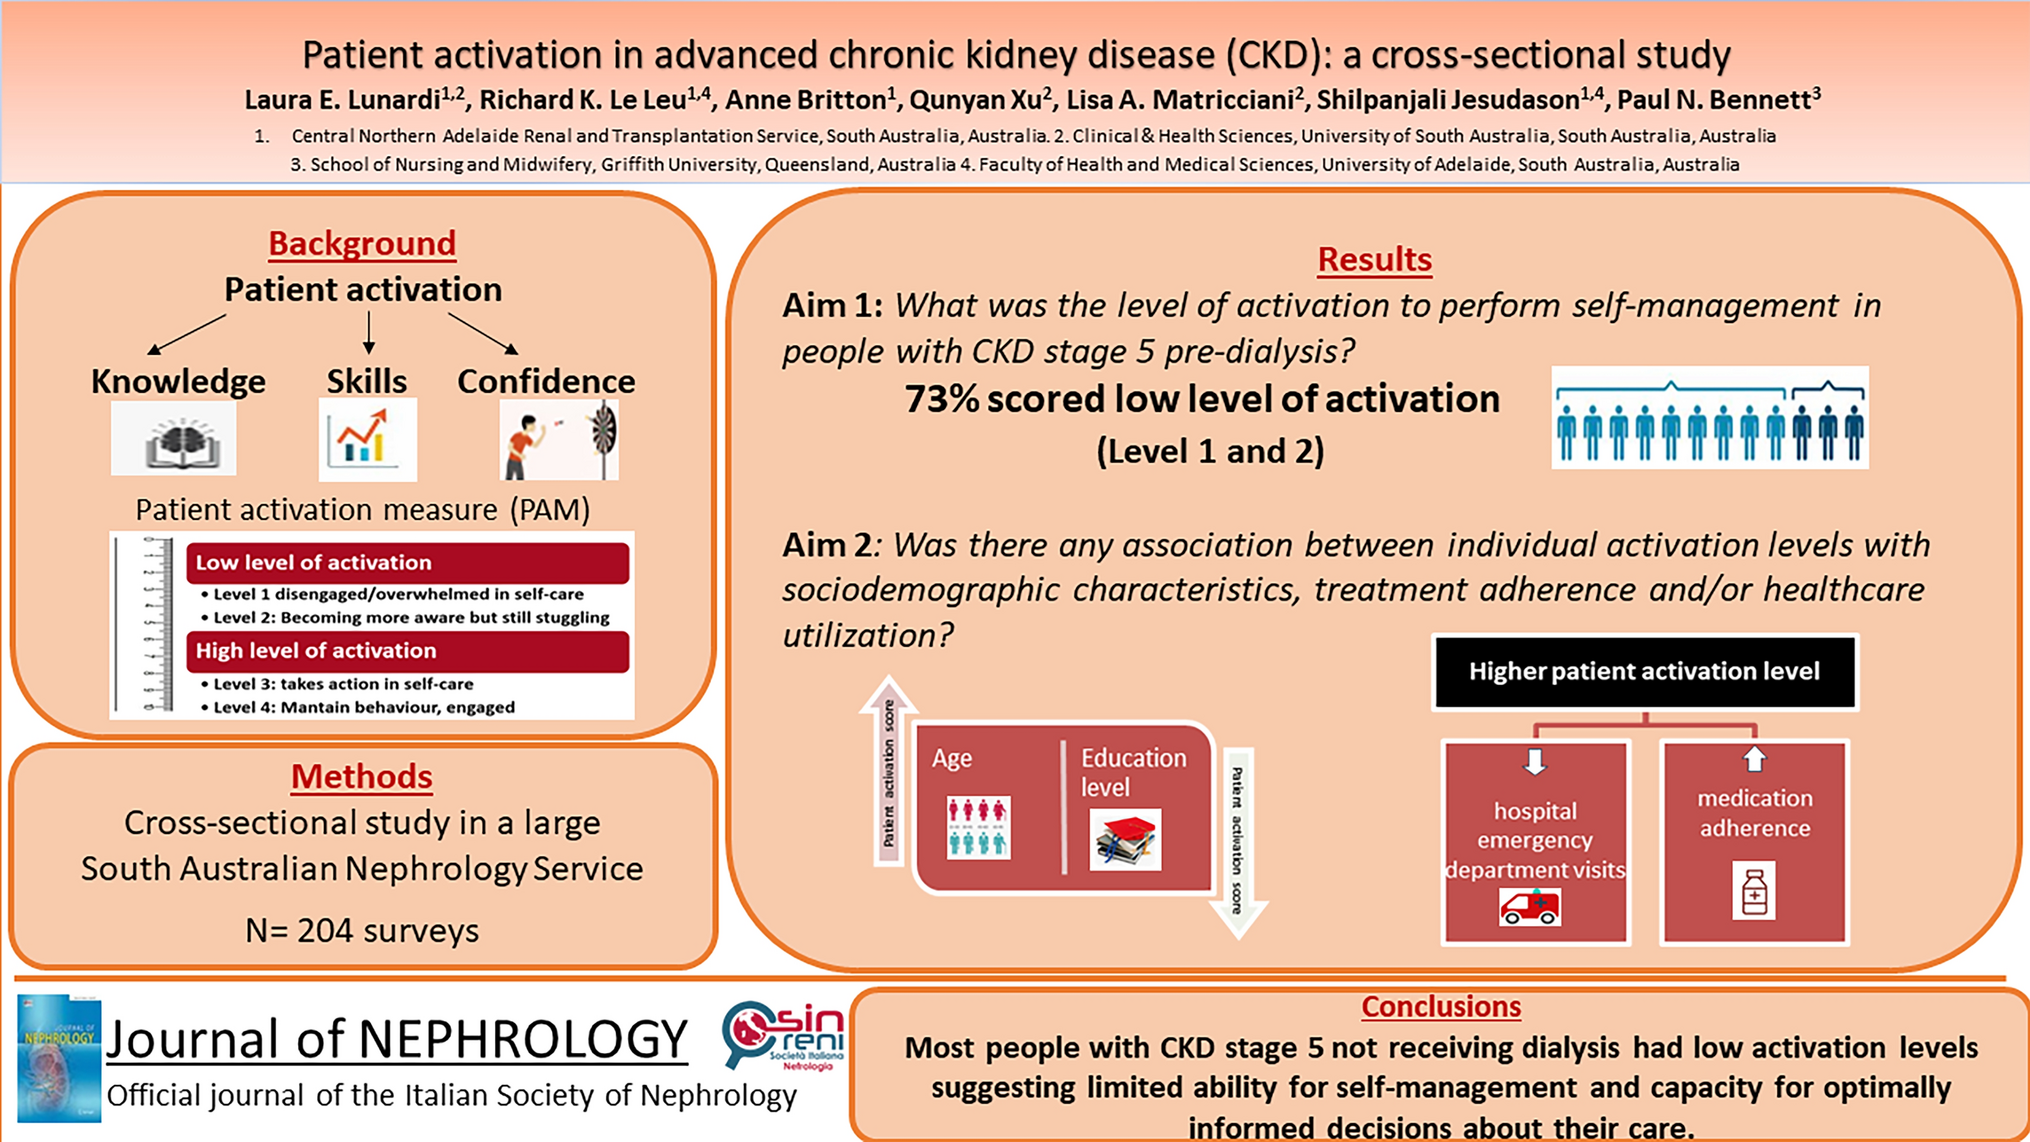 Patient activation in advanced chronic kidney disease: a cross-sectional study